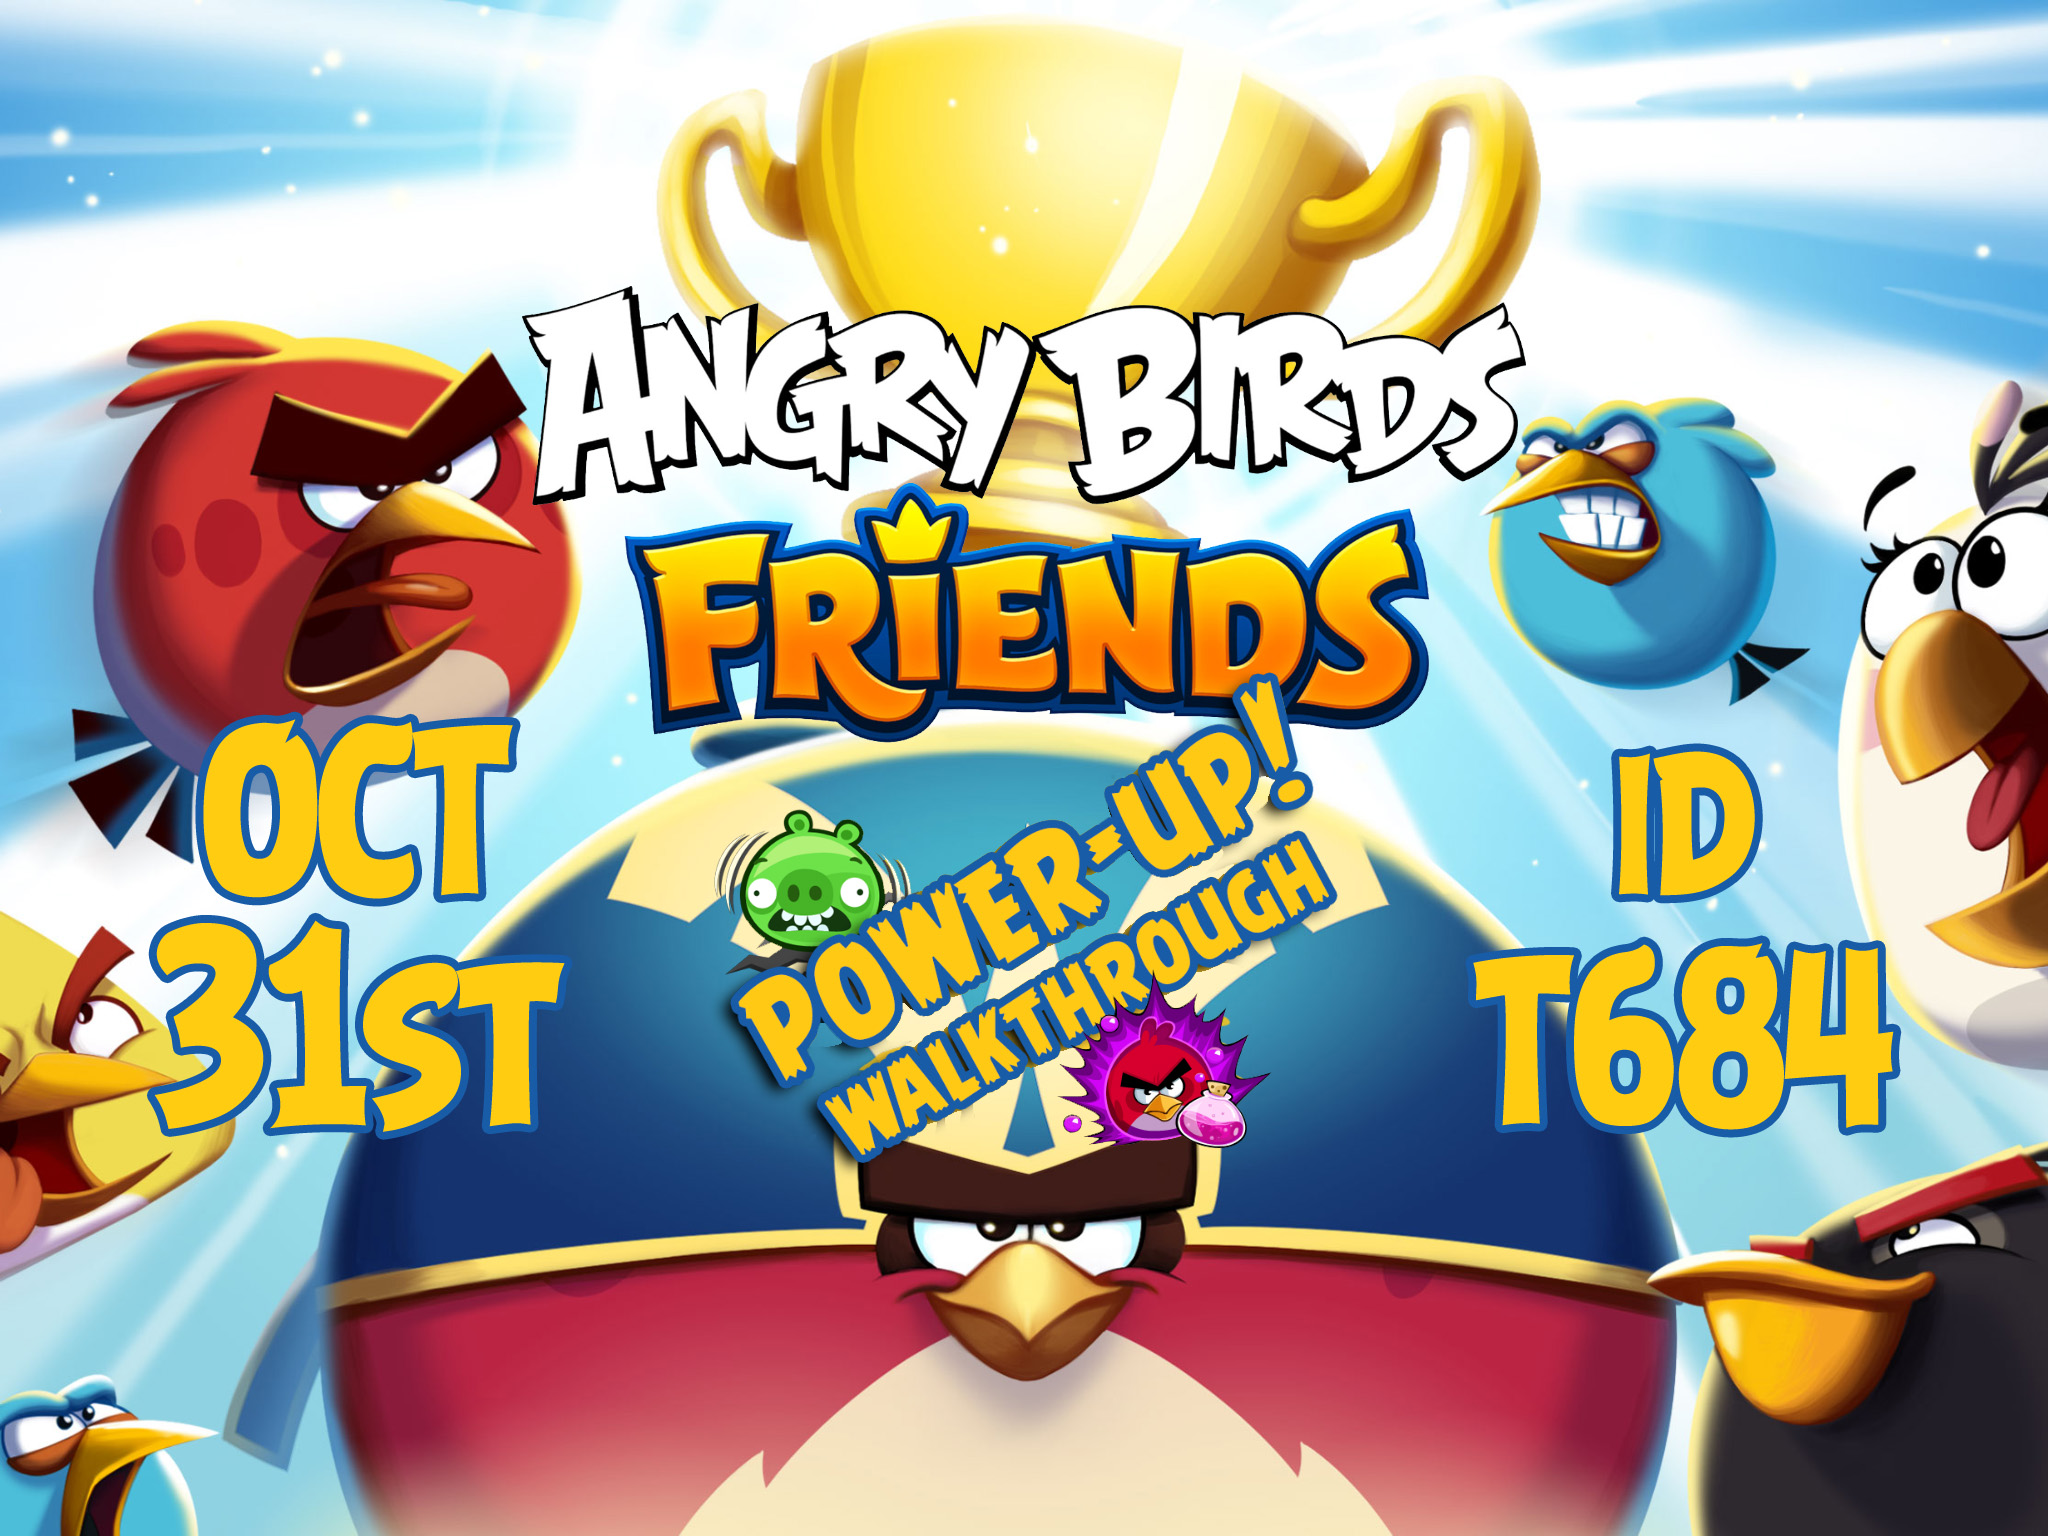 Angry-Birds-Friends-Tournament-T684-Feature-Image-PU